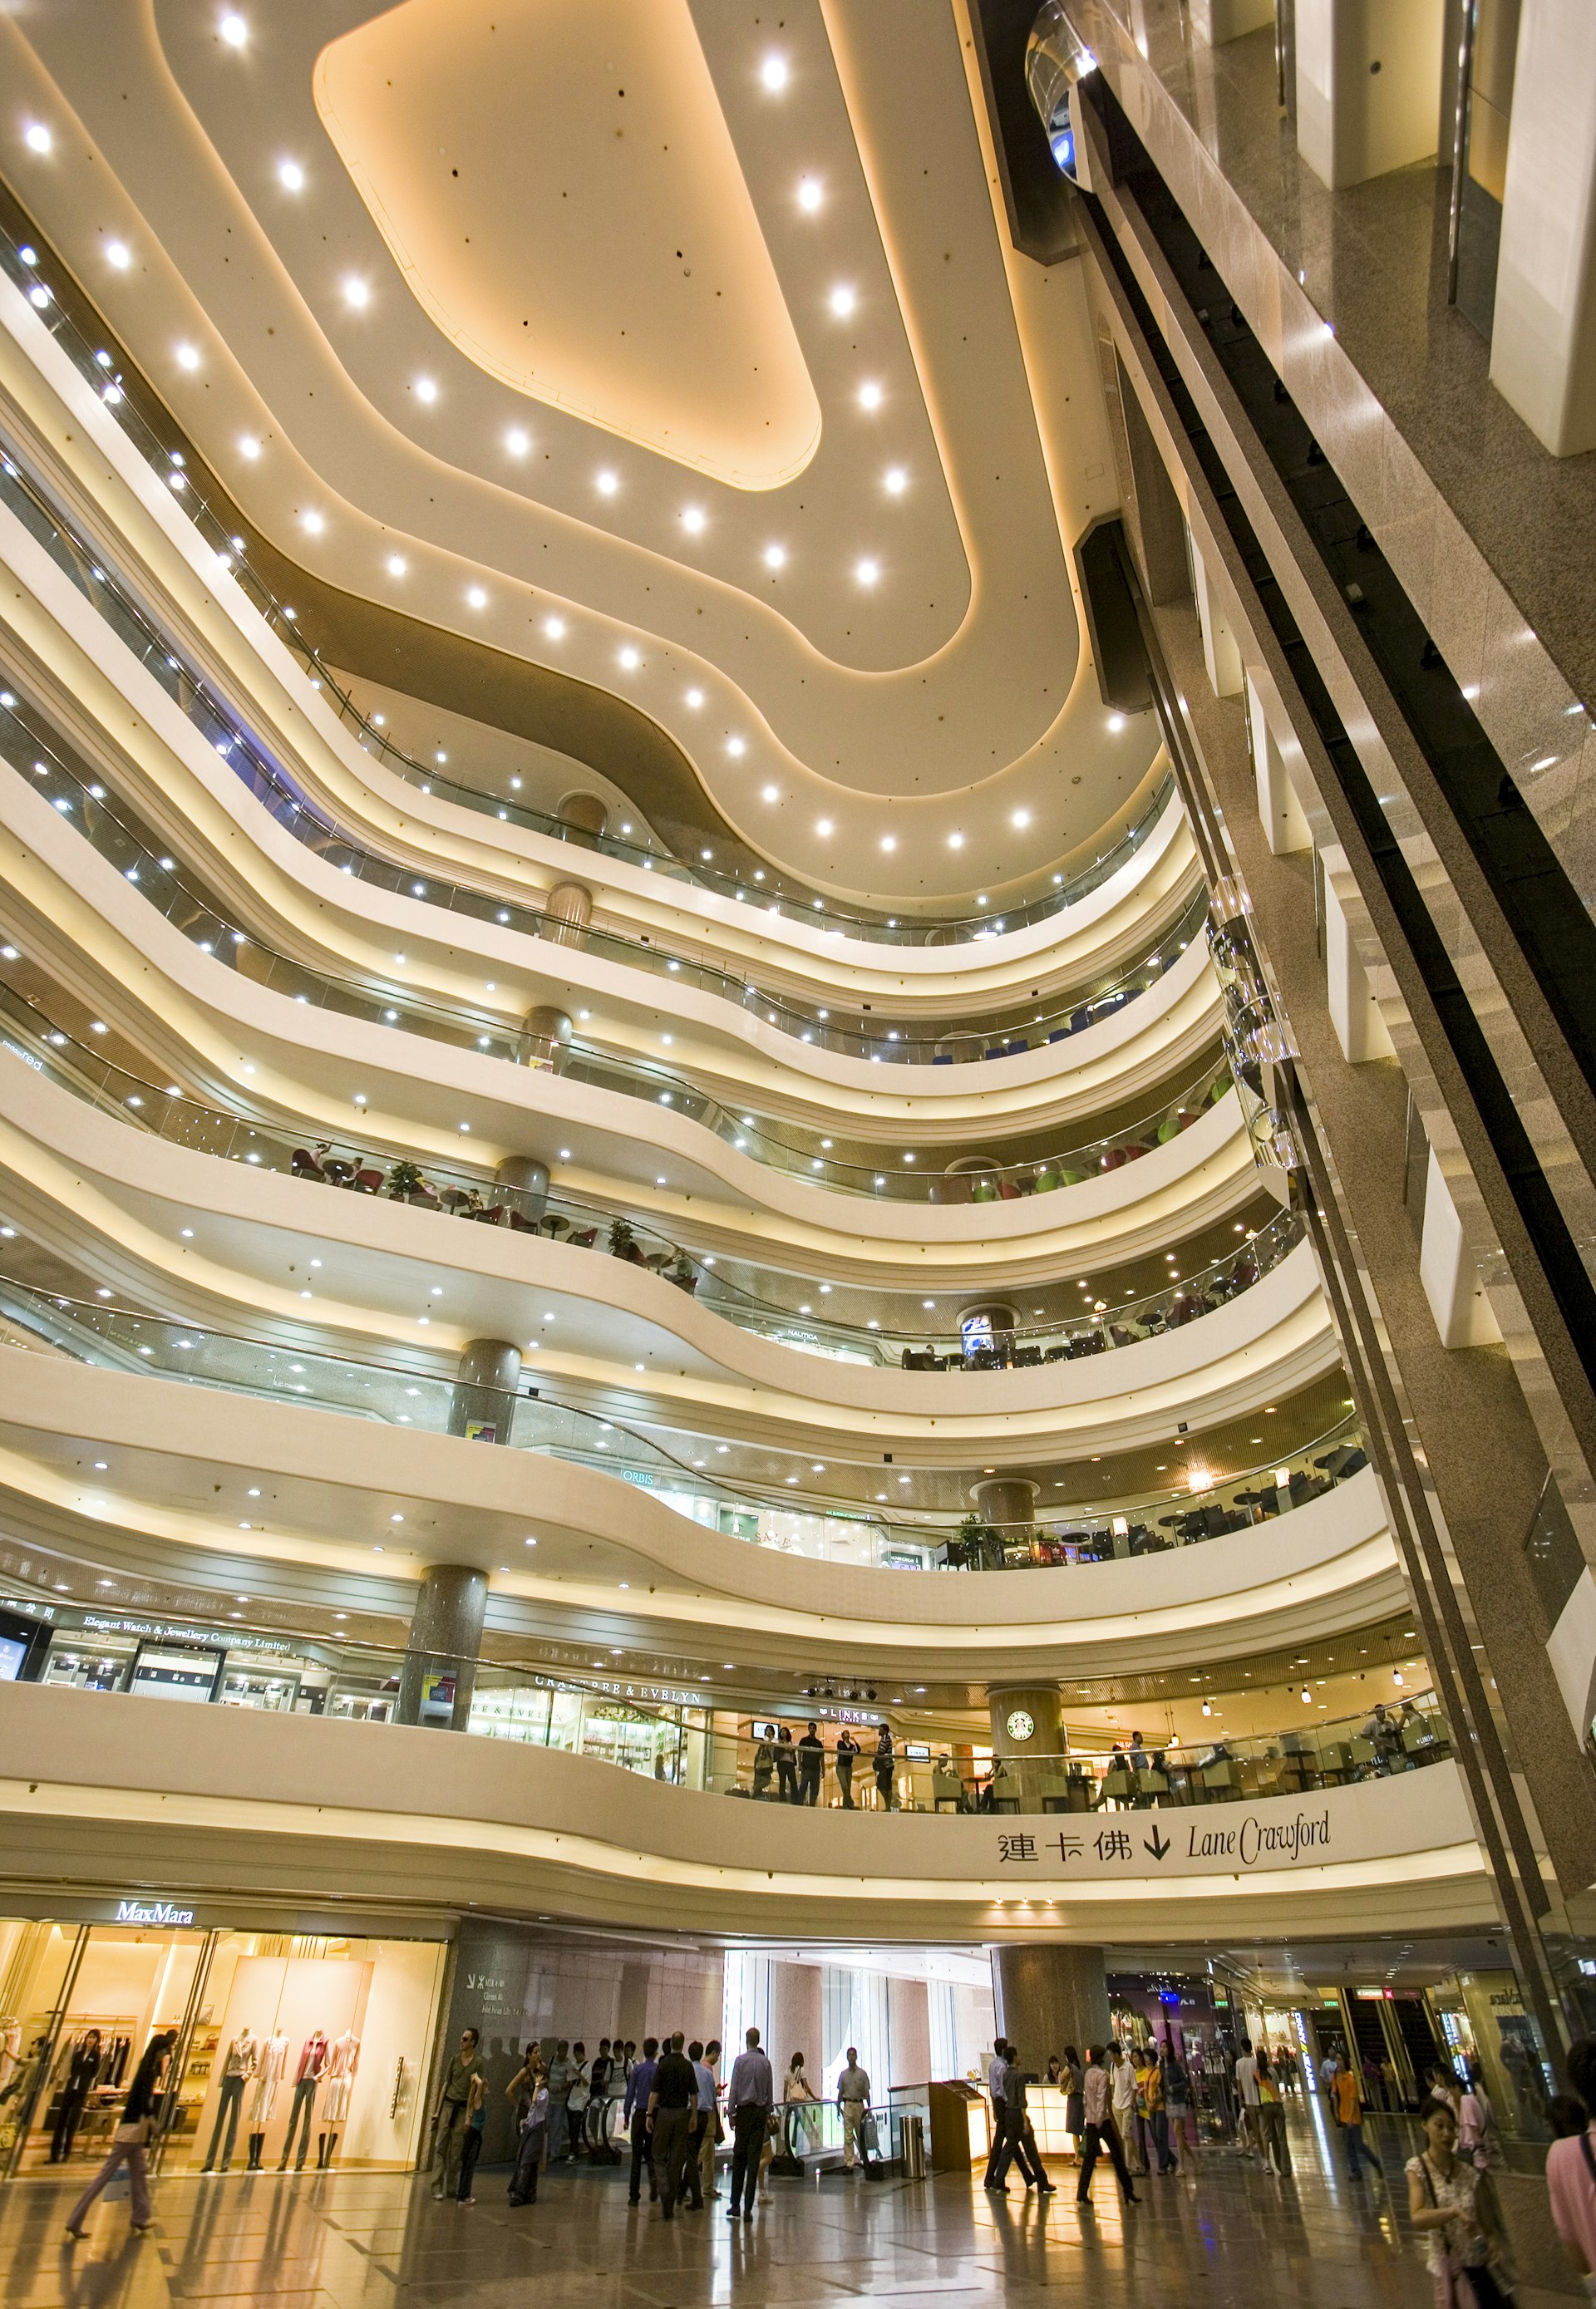 A view of a well-lit, tiered atrium with seven stories at Times Square Mall, Hong Kong.